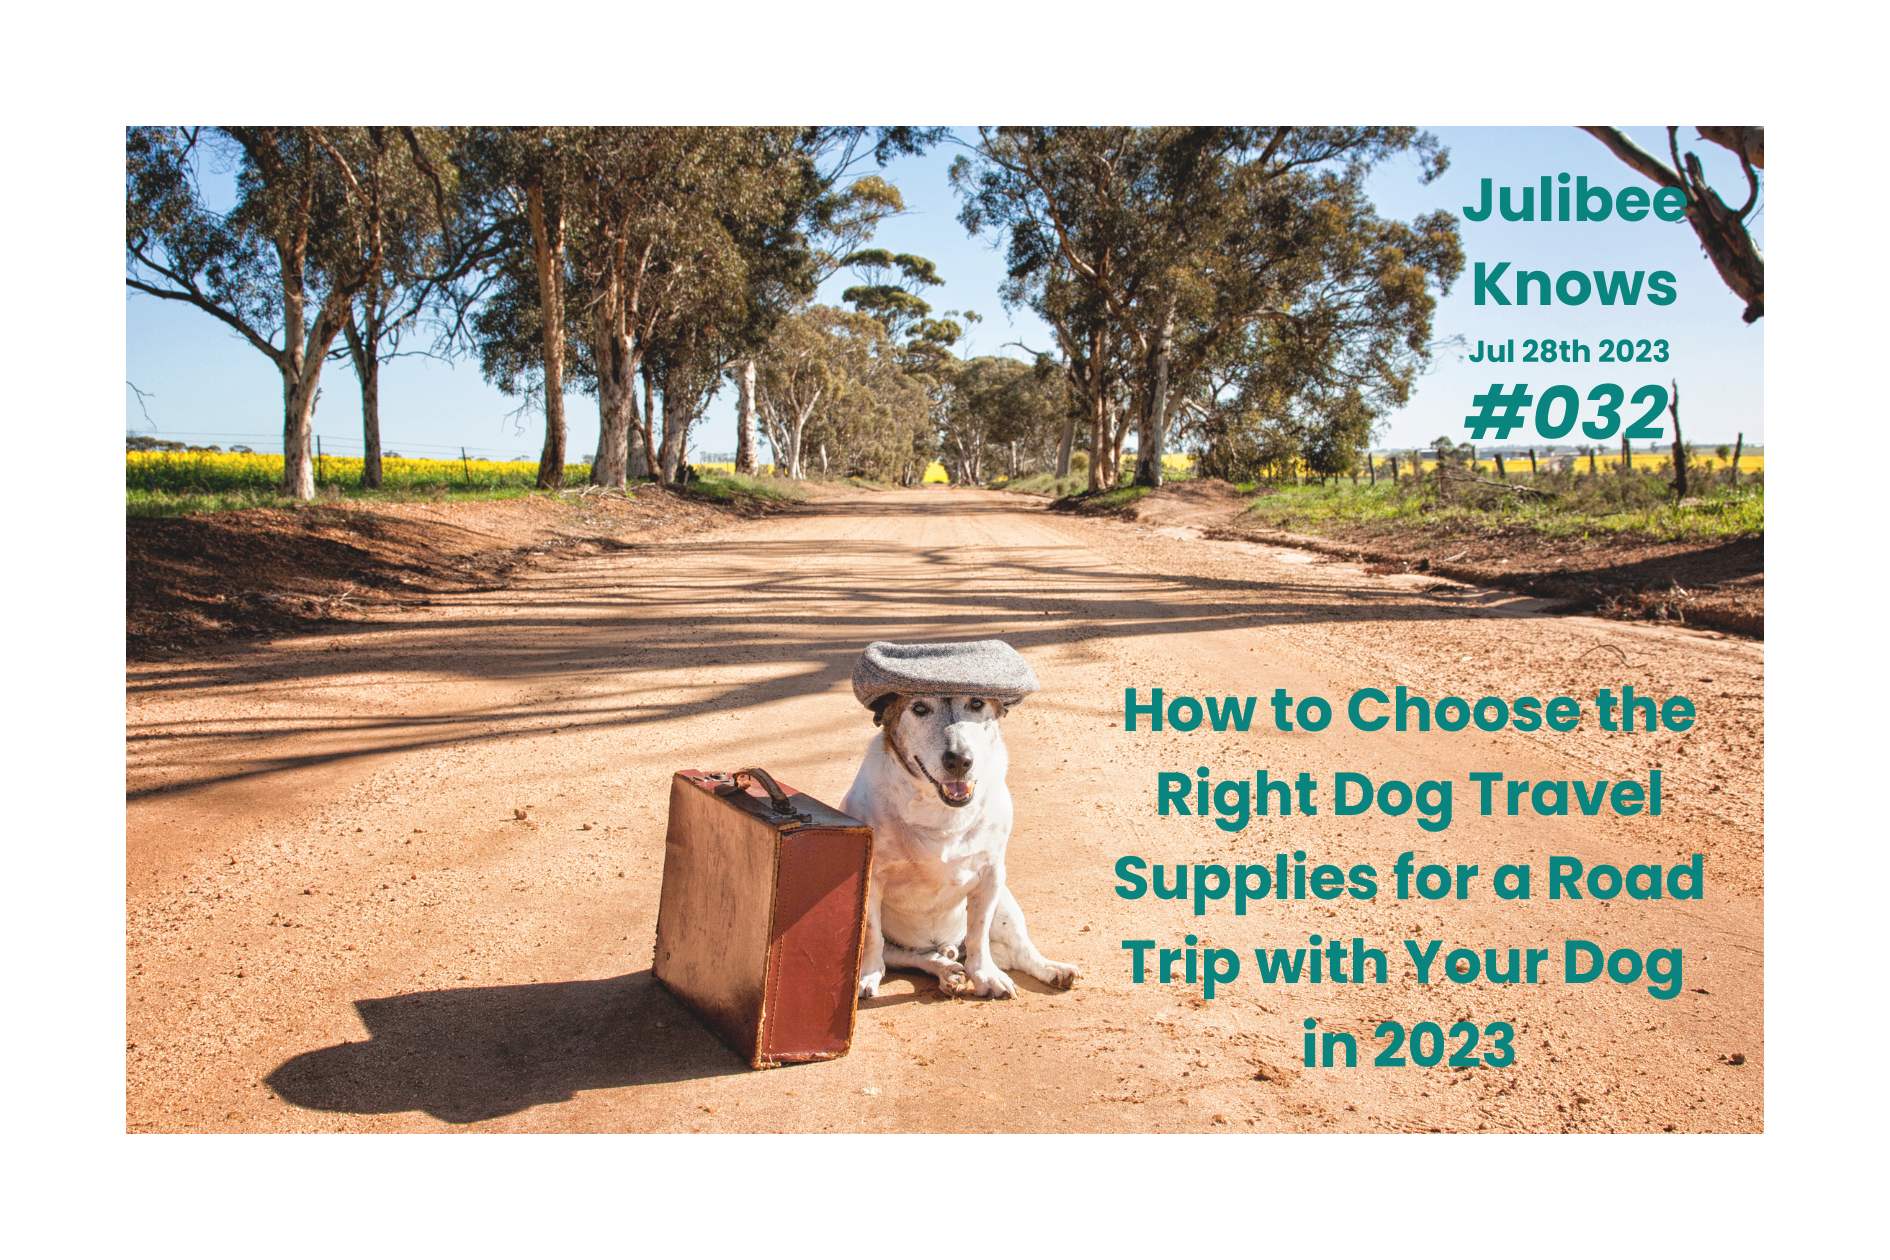 How to Choose the Right Dog Travel Supplies for a Road Trip with Your Dog in 2023